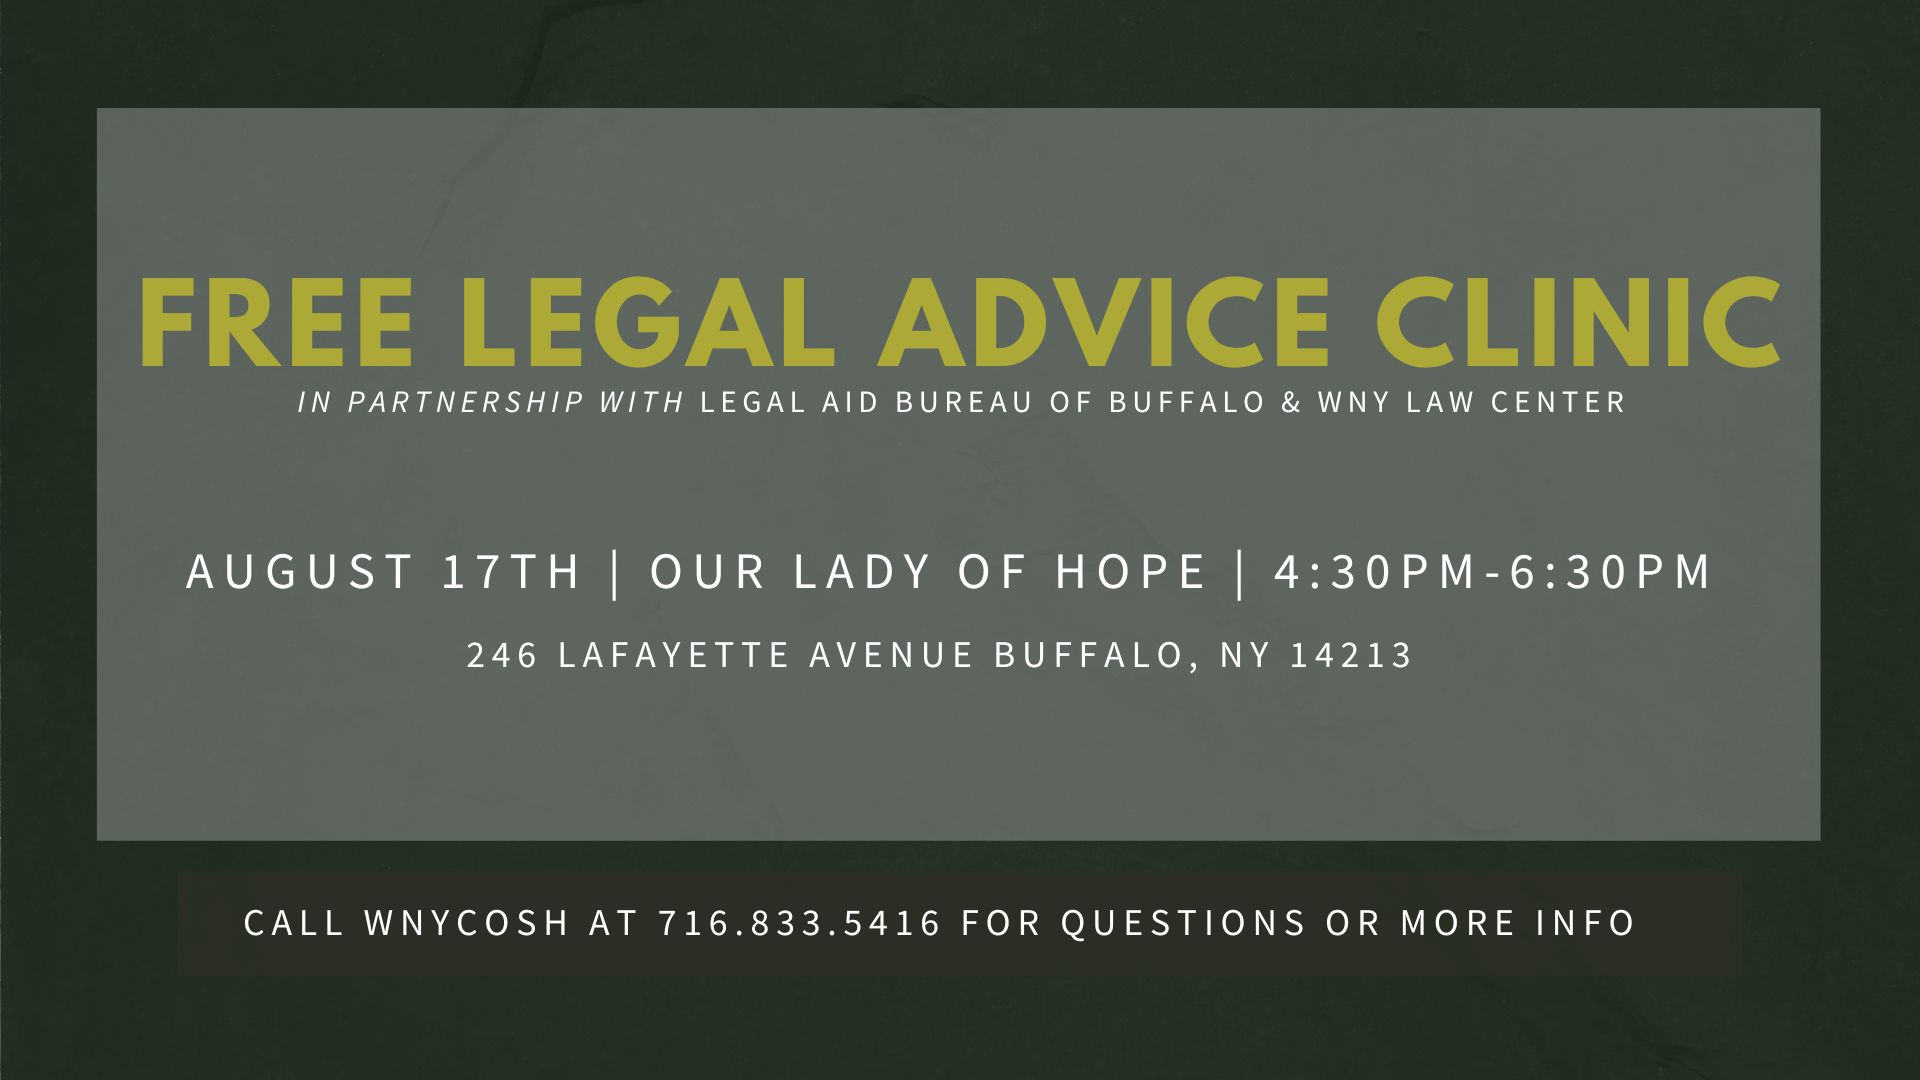 Gray flyer reading "Free Legal Advice Clinic" in partnership with Legal Aid Bureau of Buffalo and Western New York Law Center with the time, date, and location of the next clinic.